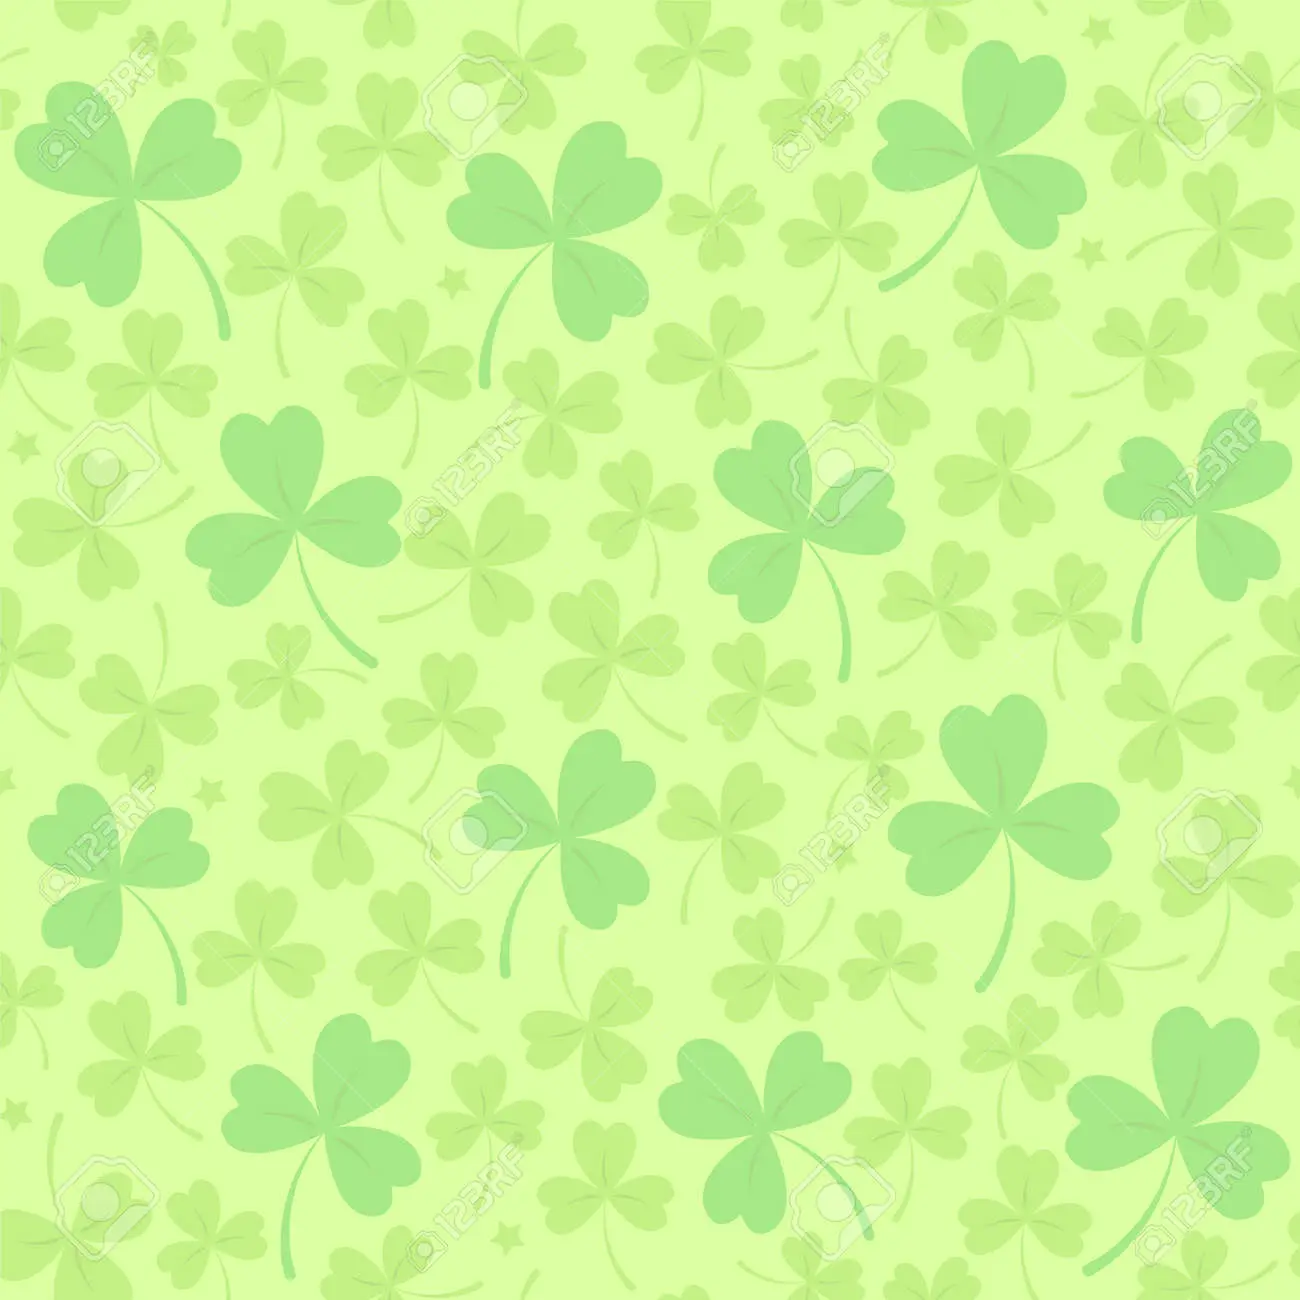 Saint patricks day seamless background in light green with cloverleafs and stars shamrock irish background for web textile wrapping paper wallpaper banner card vector illustration royalty free svg cliparts vectors and stock